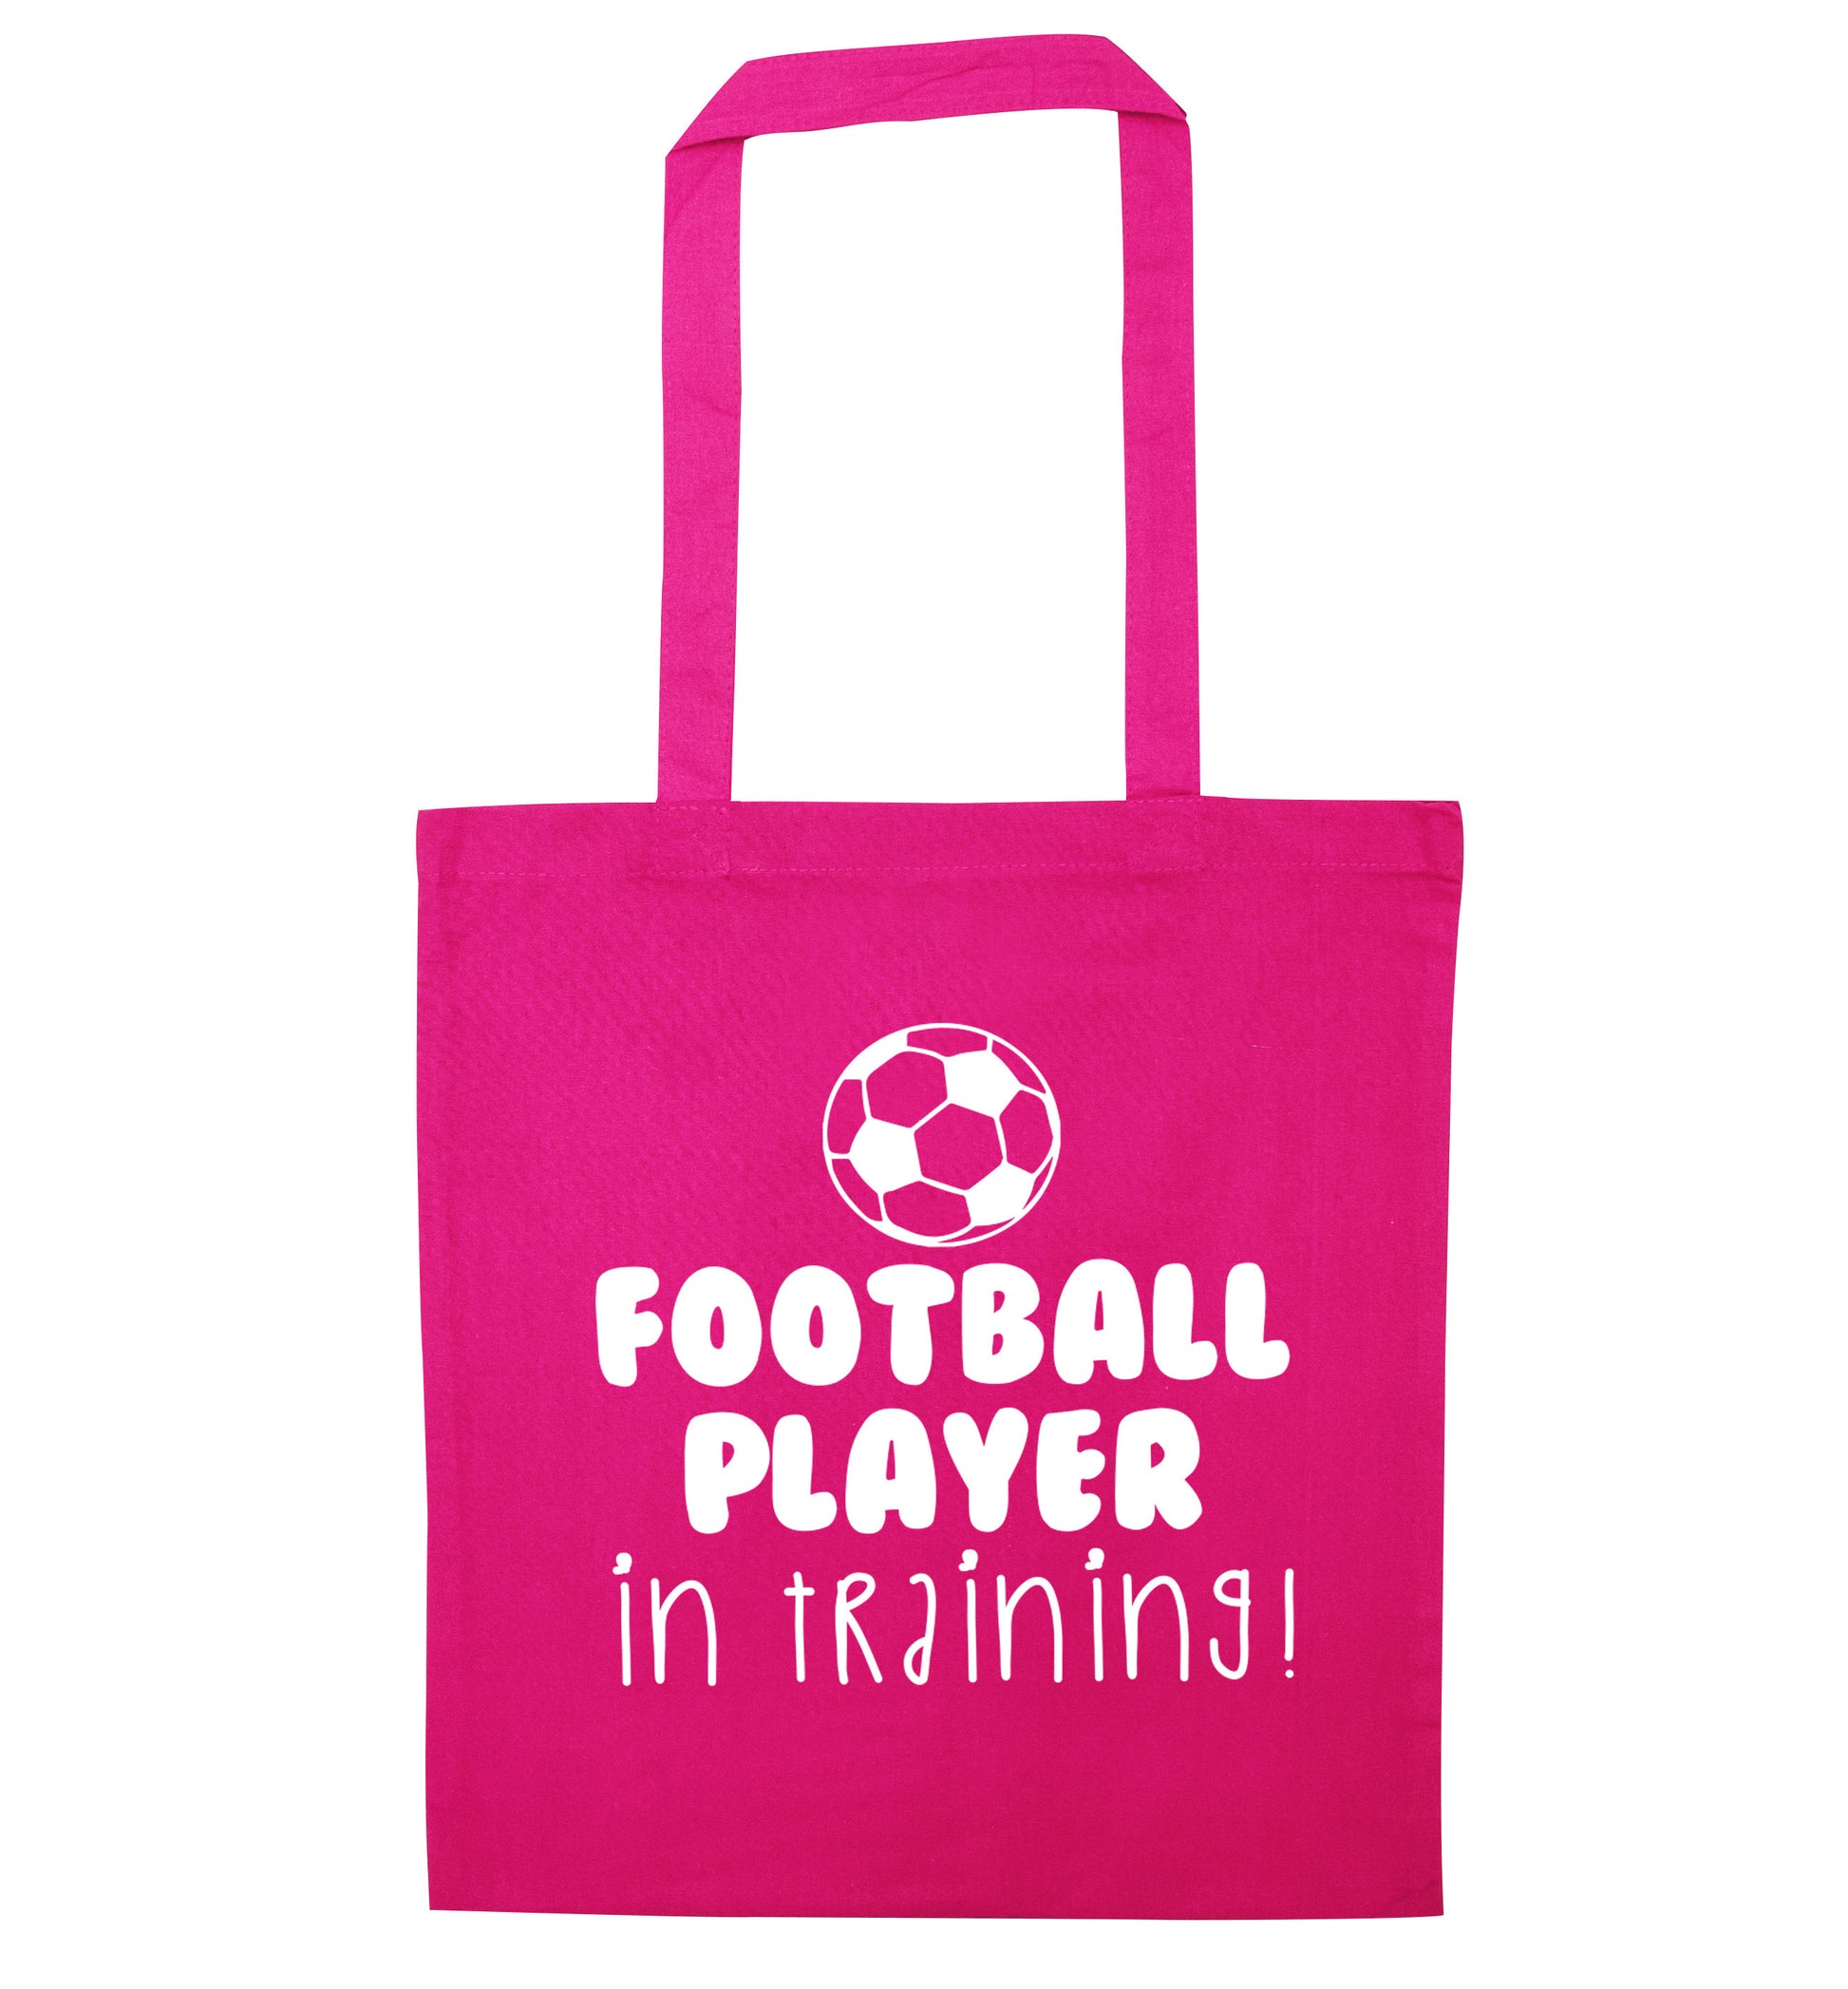 Football player in training pink tote bag